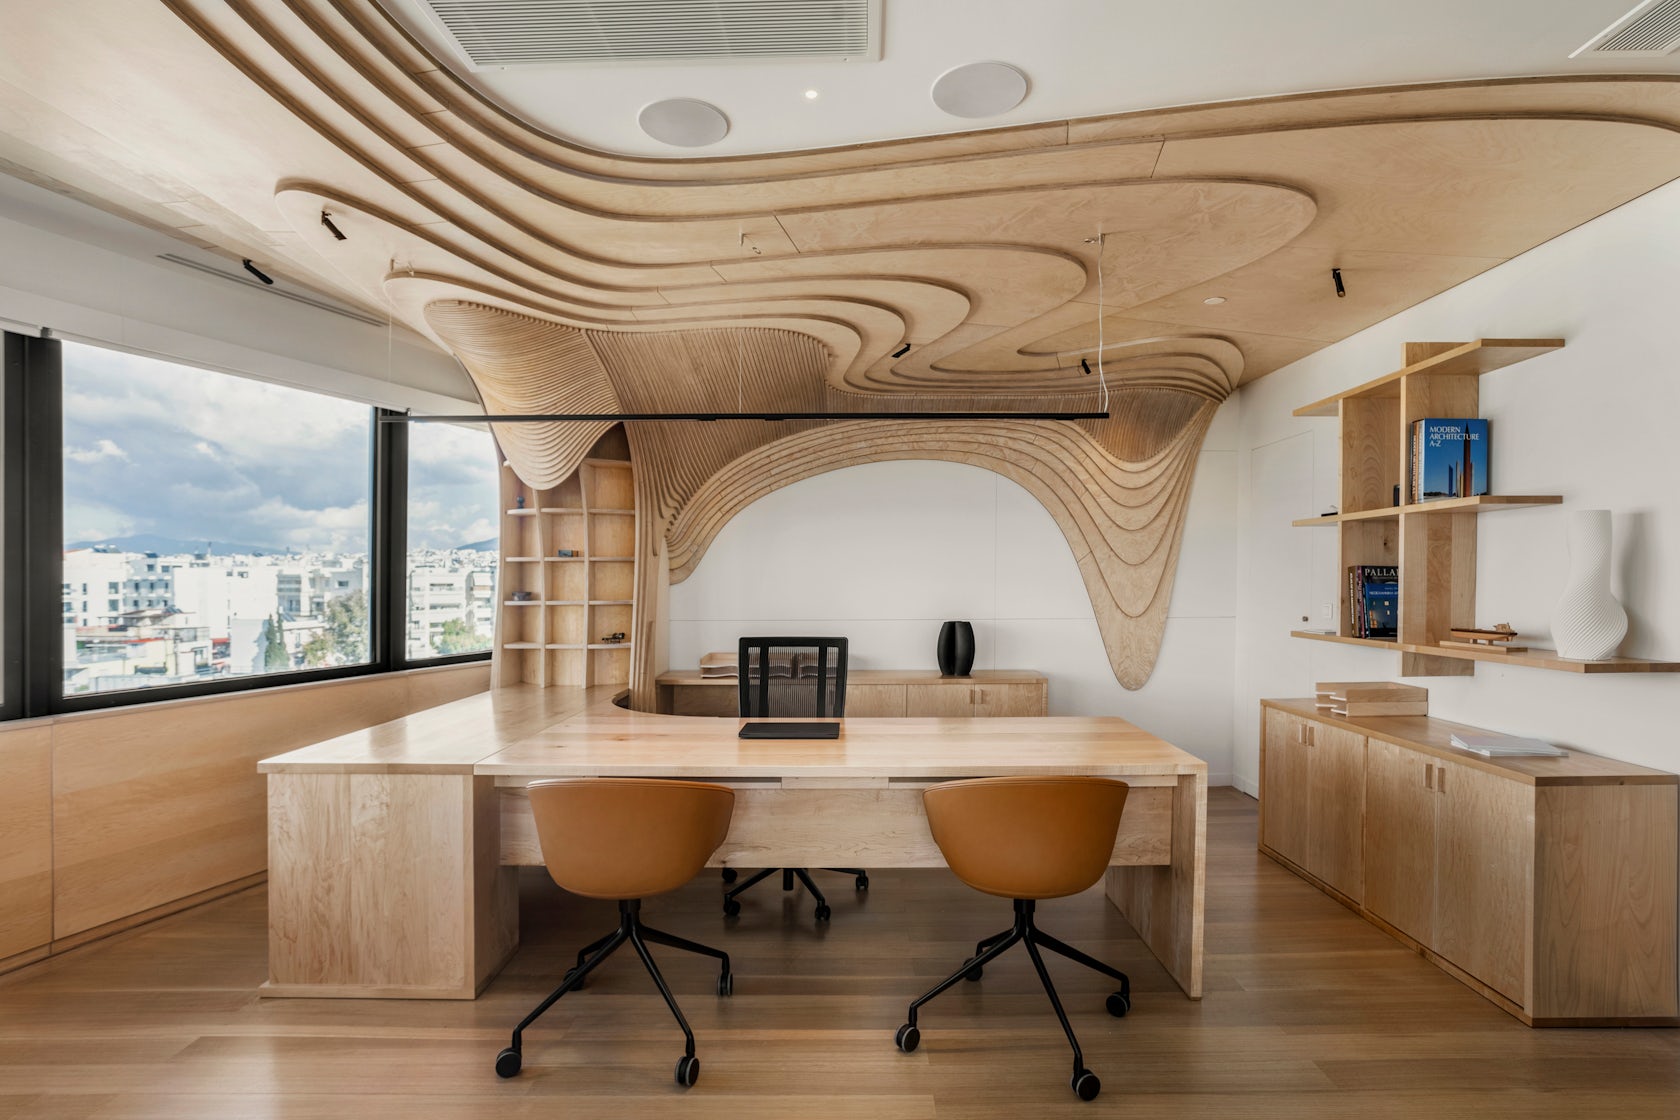 Tenon Architecture Sculpts Fluid Geometric Forms for the ONASSIS GROUP Office Renovation